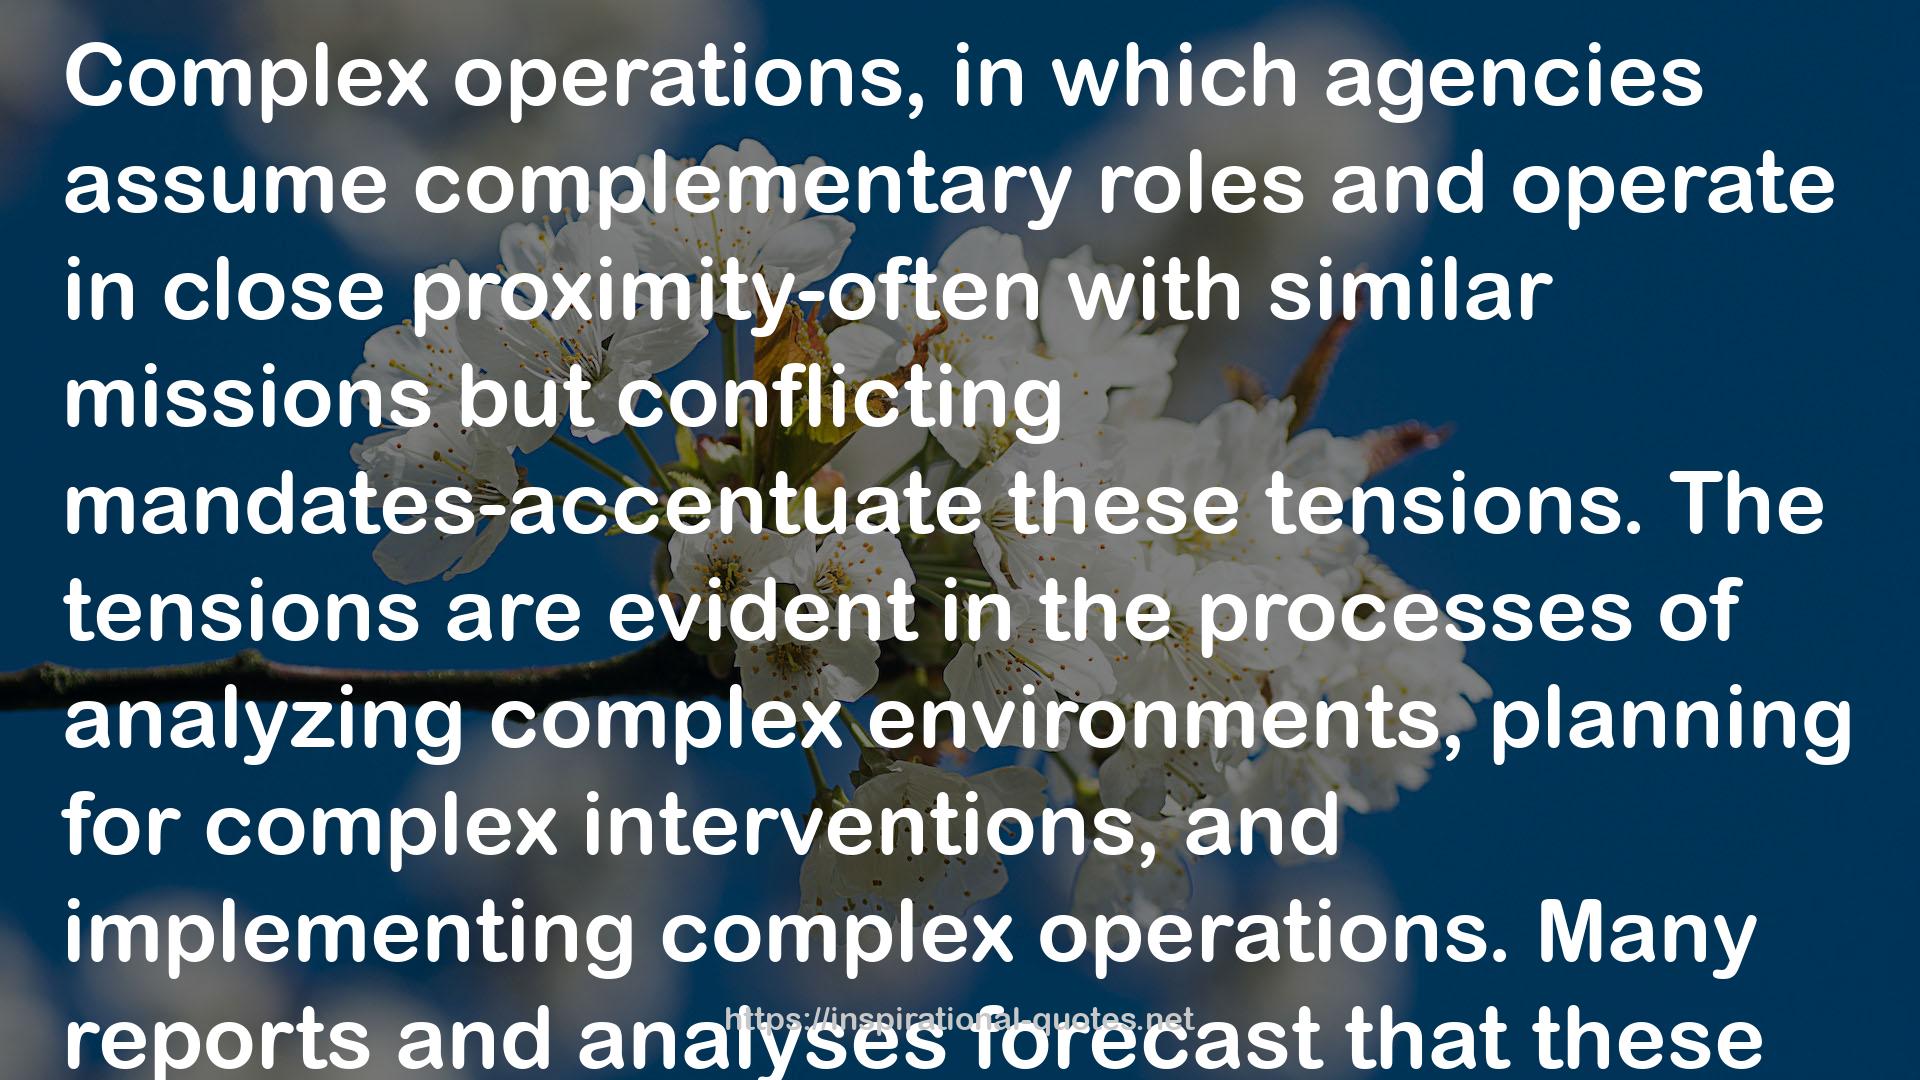 Commanding Heights: Strategic Lessons from Complex Operations QUOTES